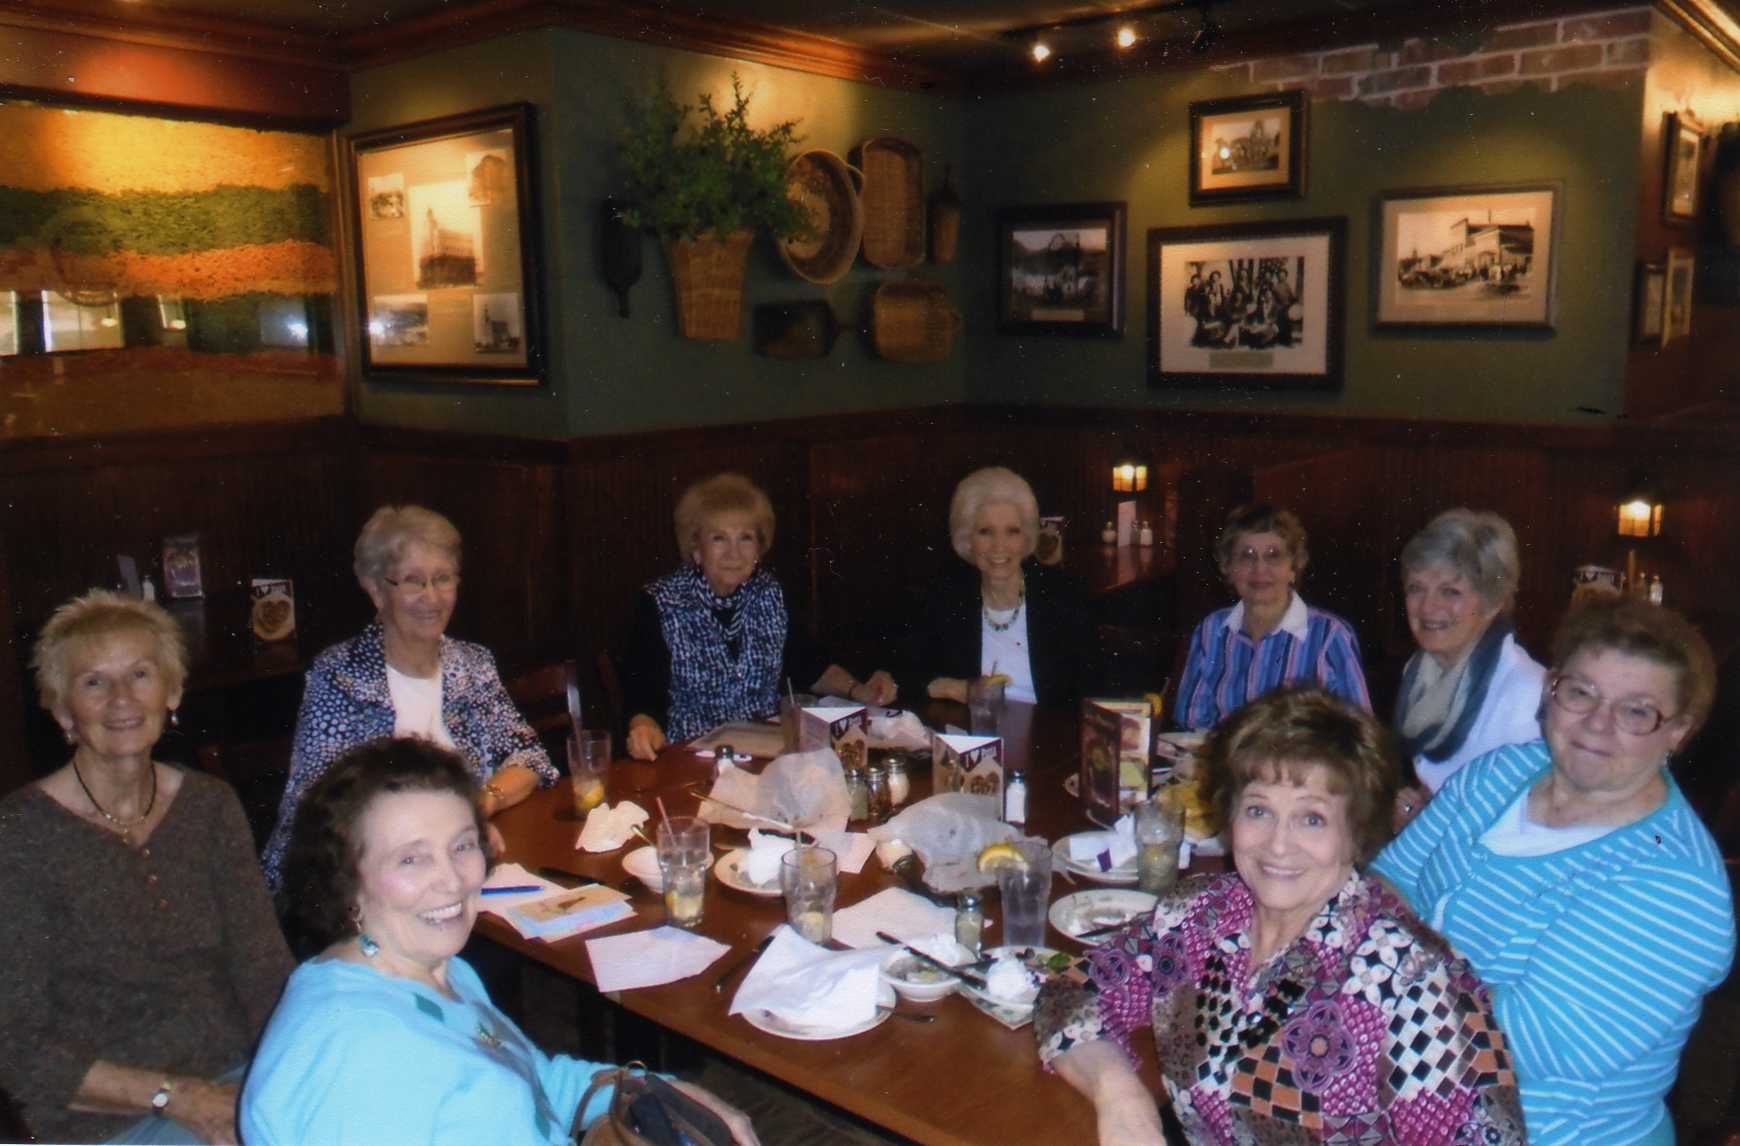 2015 reunion committee for the Dixie High School Class of 1955